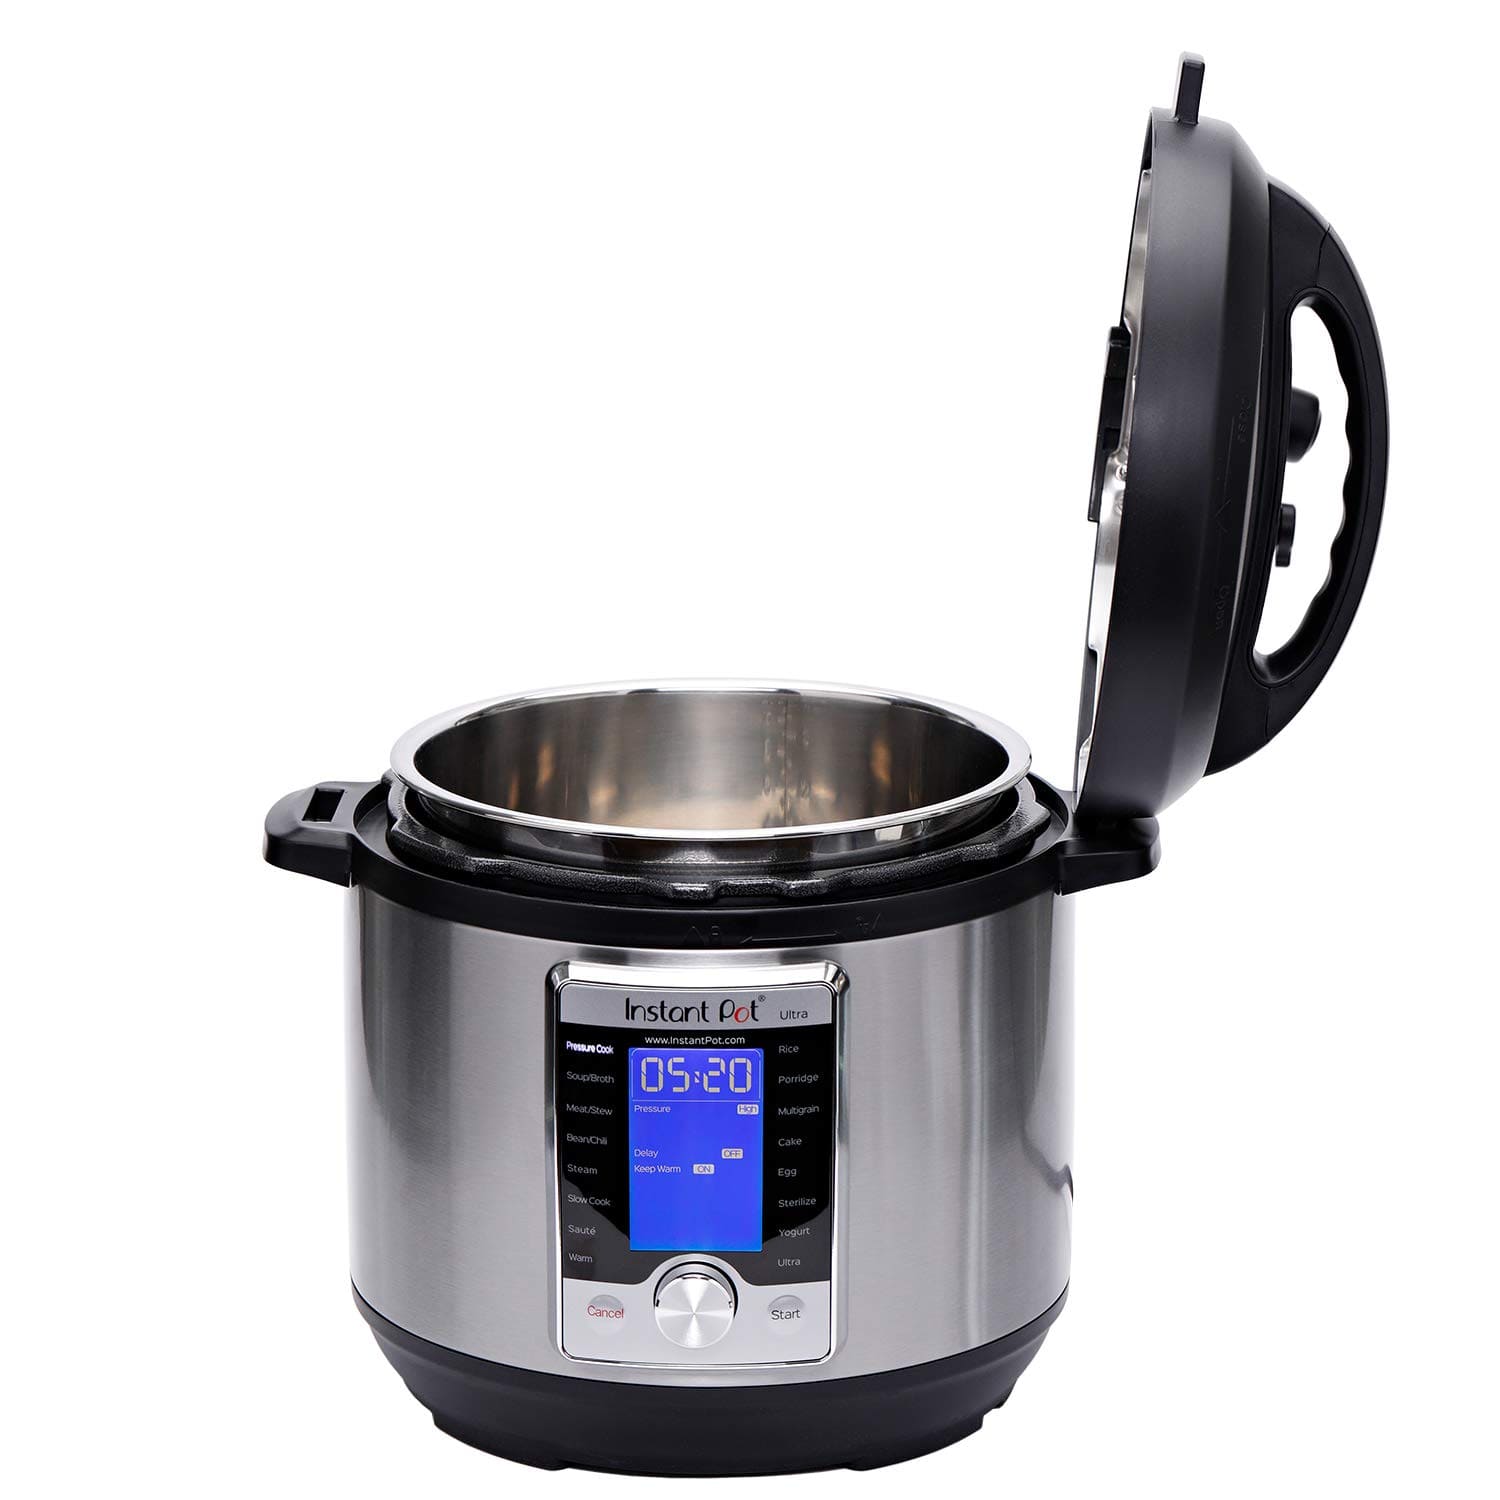 https://www.humblynomadic.com/wp-content/uploads/2019/03/Instant-Pot-Ultra-10-in-1.jpg